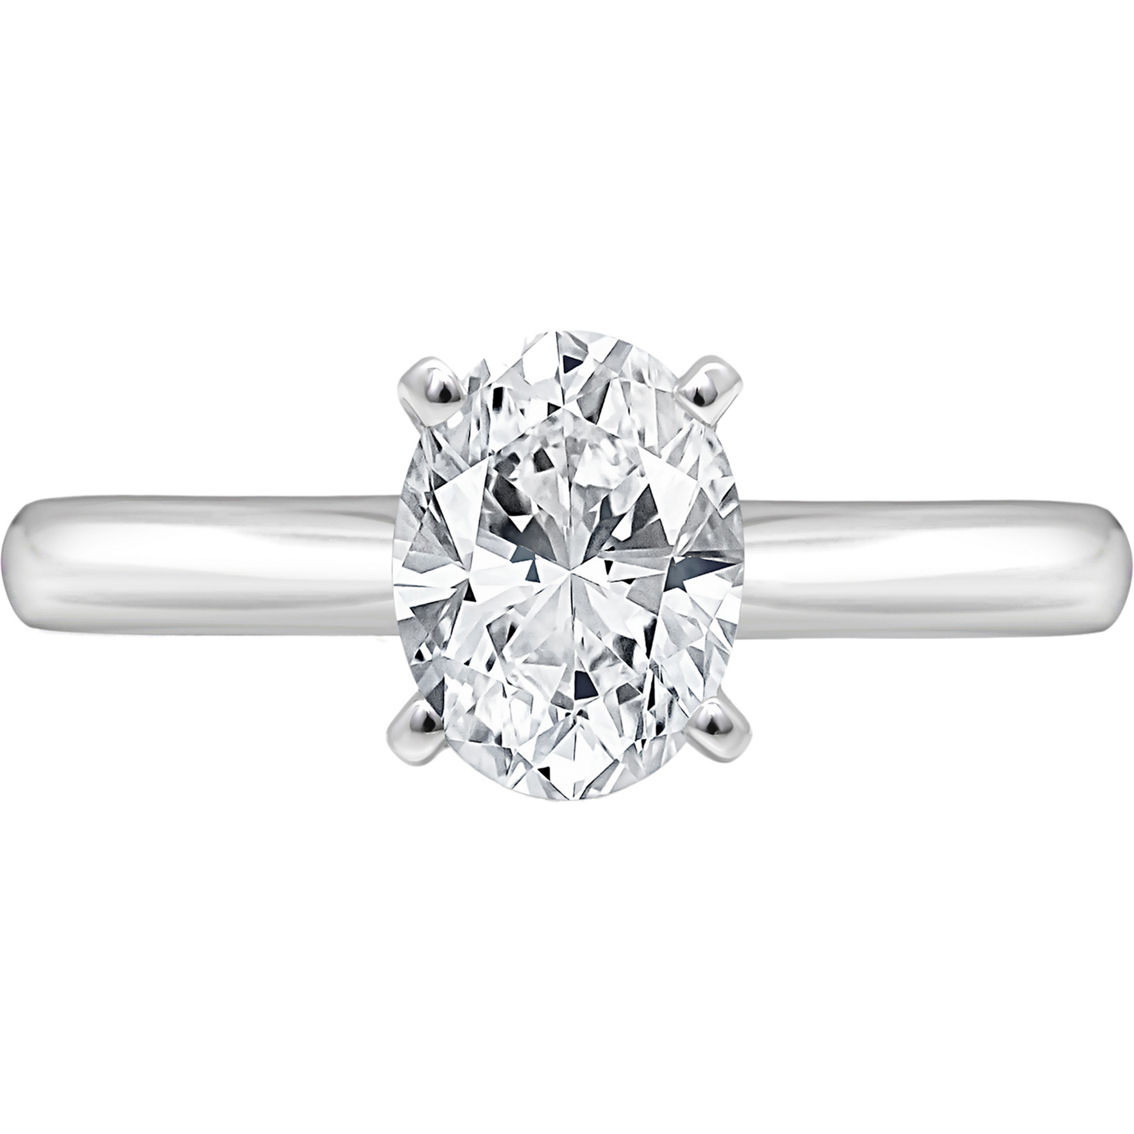 Ray of Brilliance 14K White Gold 1 1/2 CTW Lab Grown Oval Diamond Solitaire Ring - Image 2 of 4